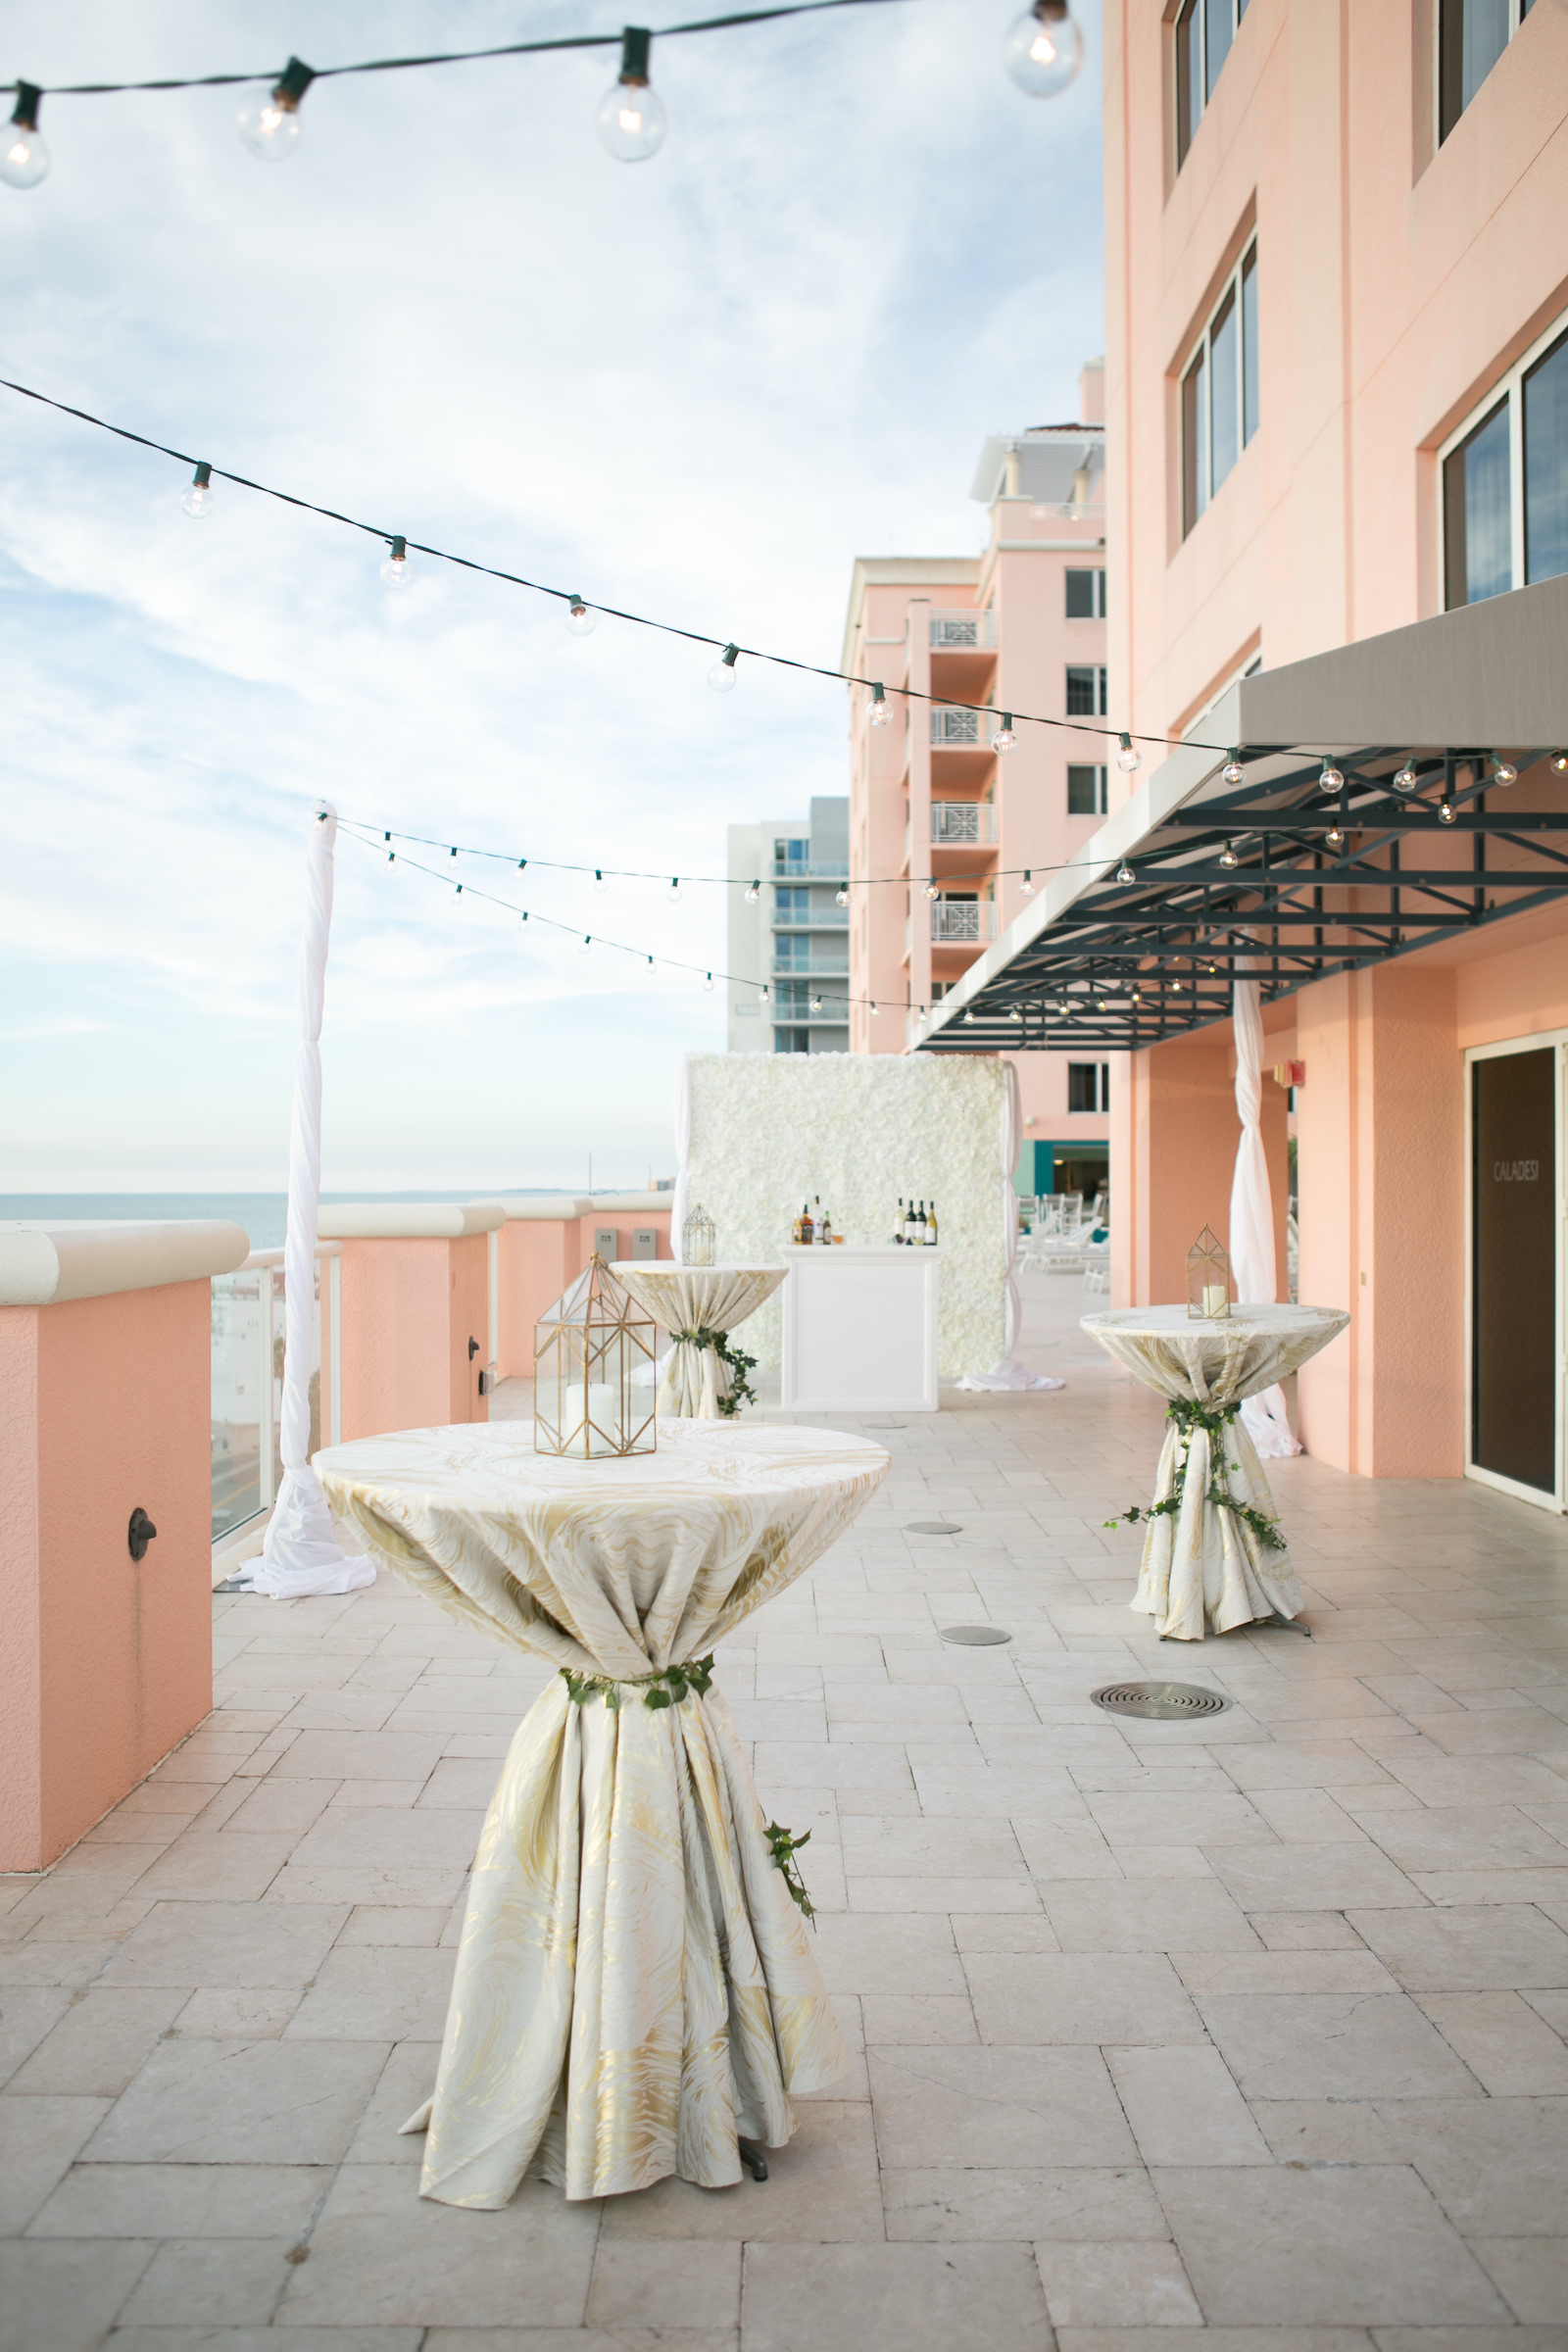 Modern Elegant Hotel Balcony Waterfront Wedding Venue Hyatt Regency Clearwater Beach, Cocktail Hour Wedding Decor, Tall Round Tables with Neutral Linens, Greenery and Lantern | Tampa Bay Wedding Planner Coastal Coordinating | Wedding Rentals Outside the Box | Wedding Photographer Carrie Wildes | Wedding Planner Coastal Coordinating